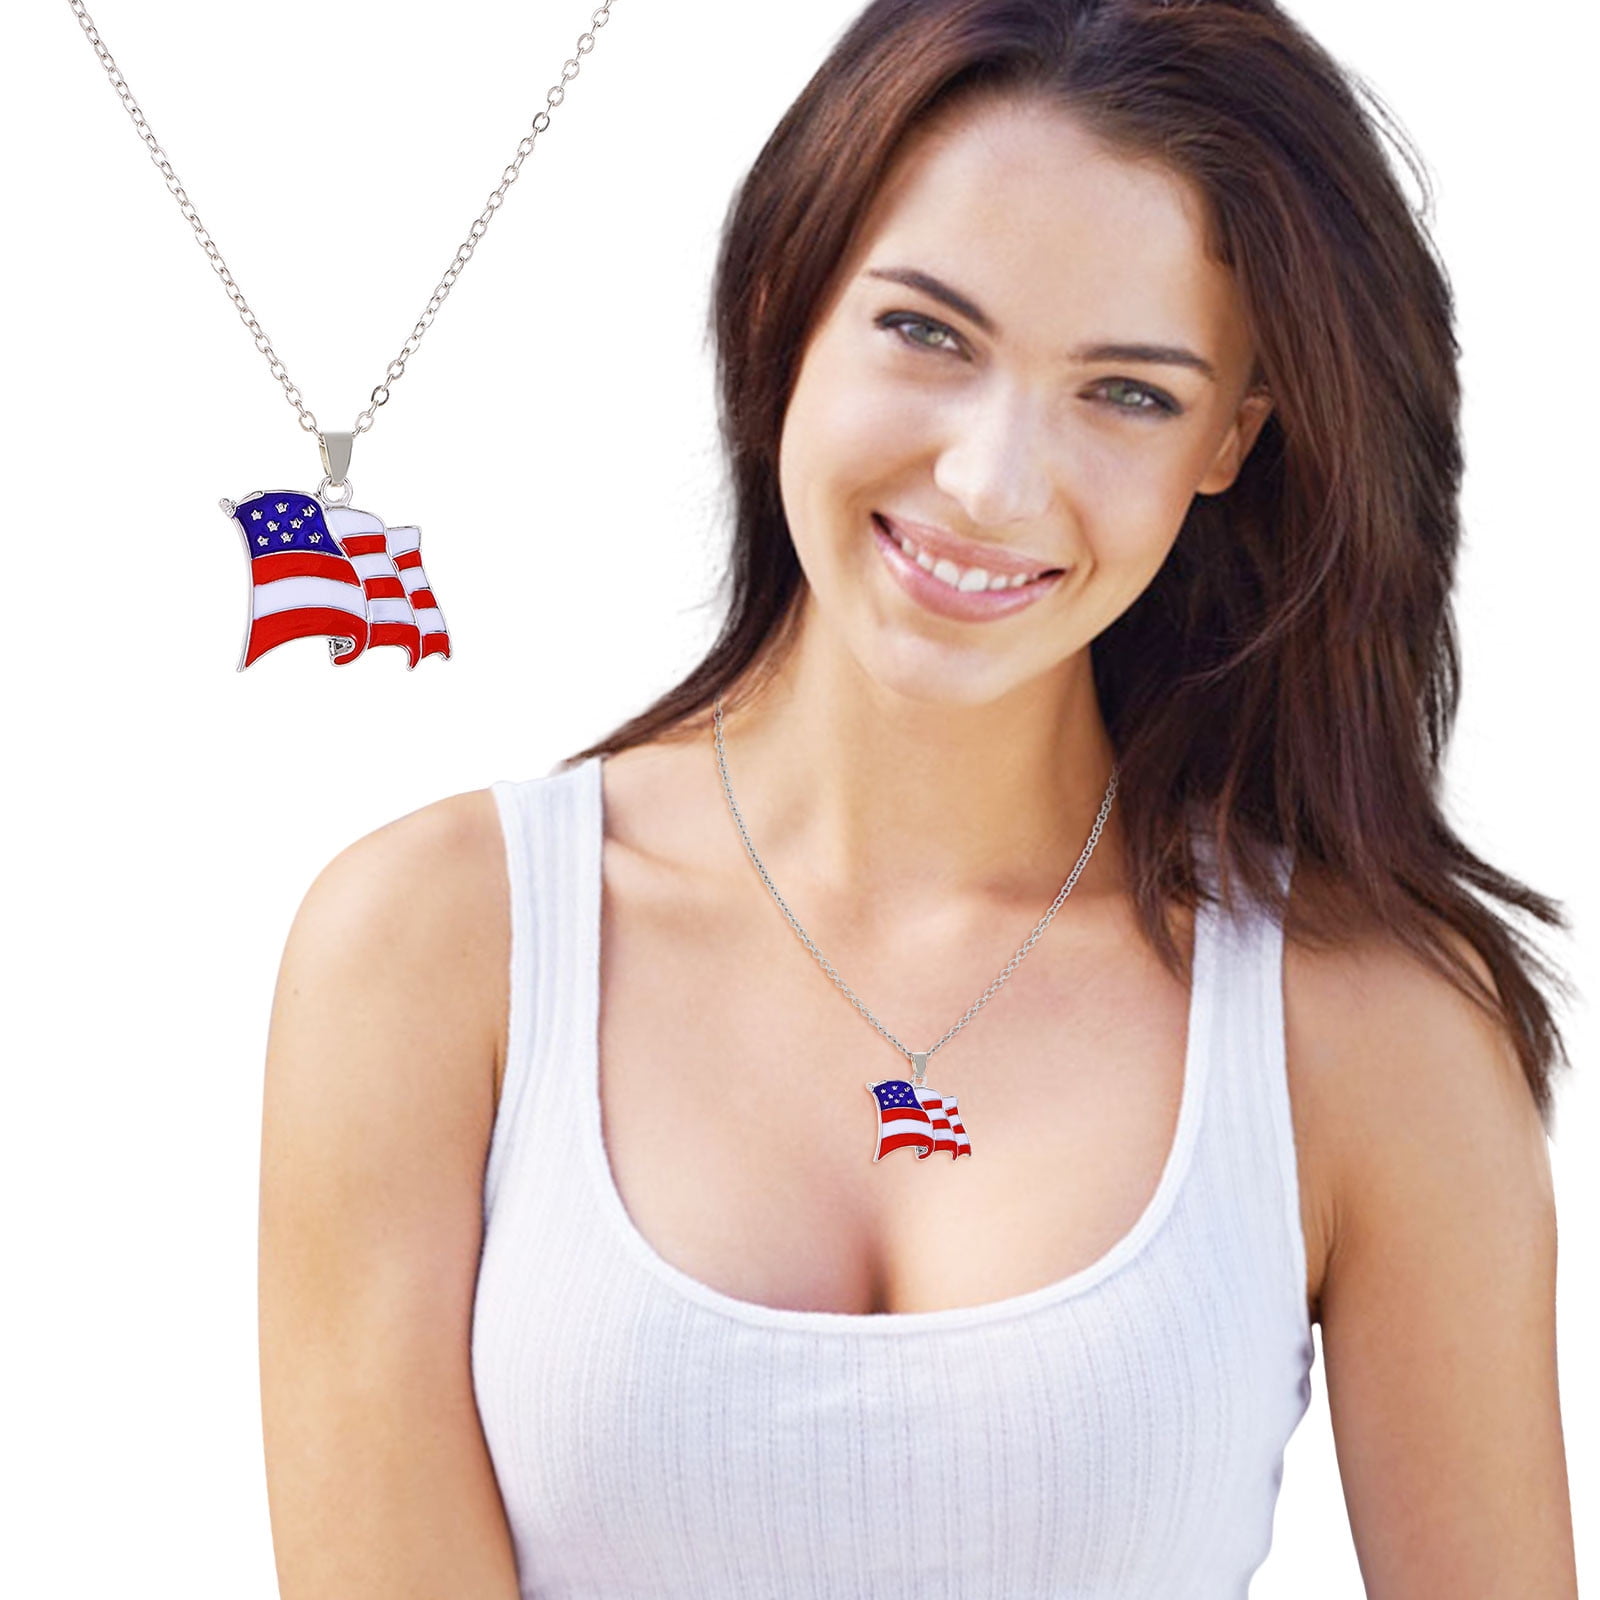 11 Awesome DIY 4th July Patriotic Jewelry Ideas - Shelterness